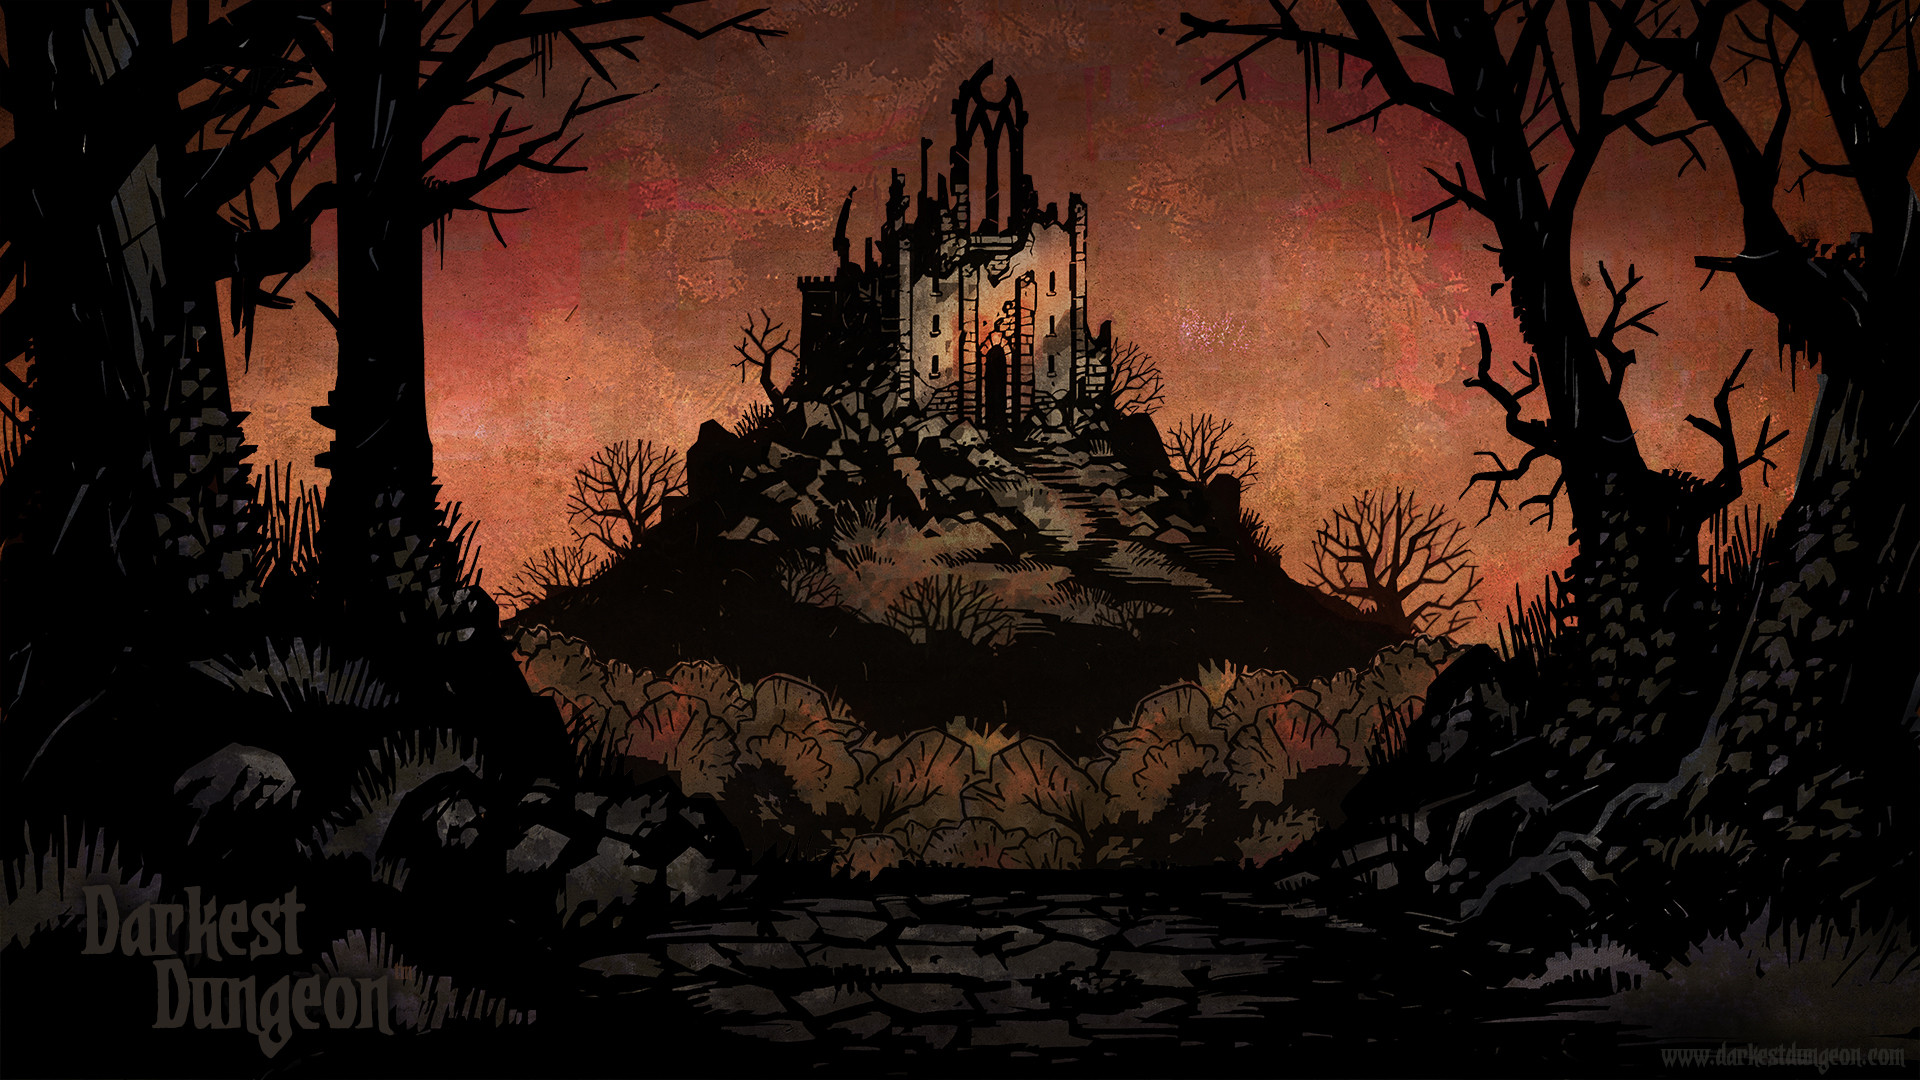 Darkest Dungeon Wallpapers, Pictures, Images